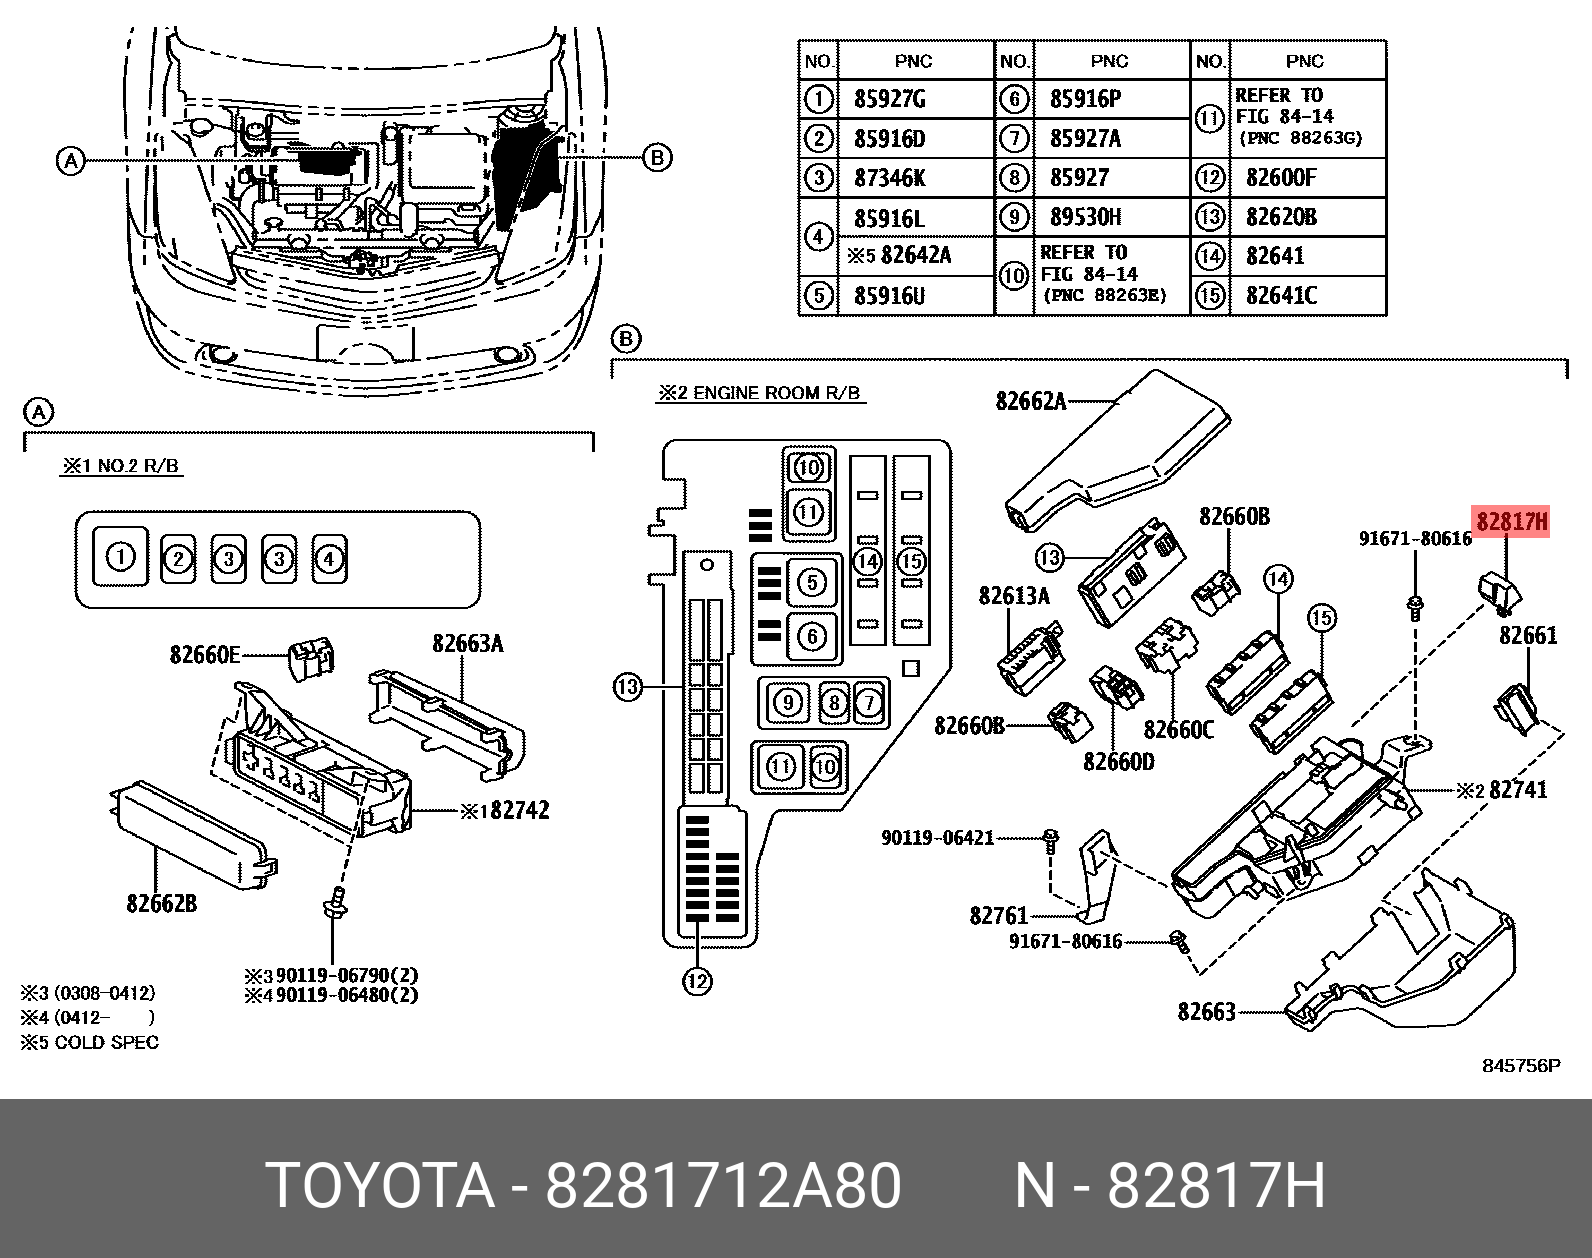 AURIS 200610 - 201208, PROTECTOR, WIRING HARNESS